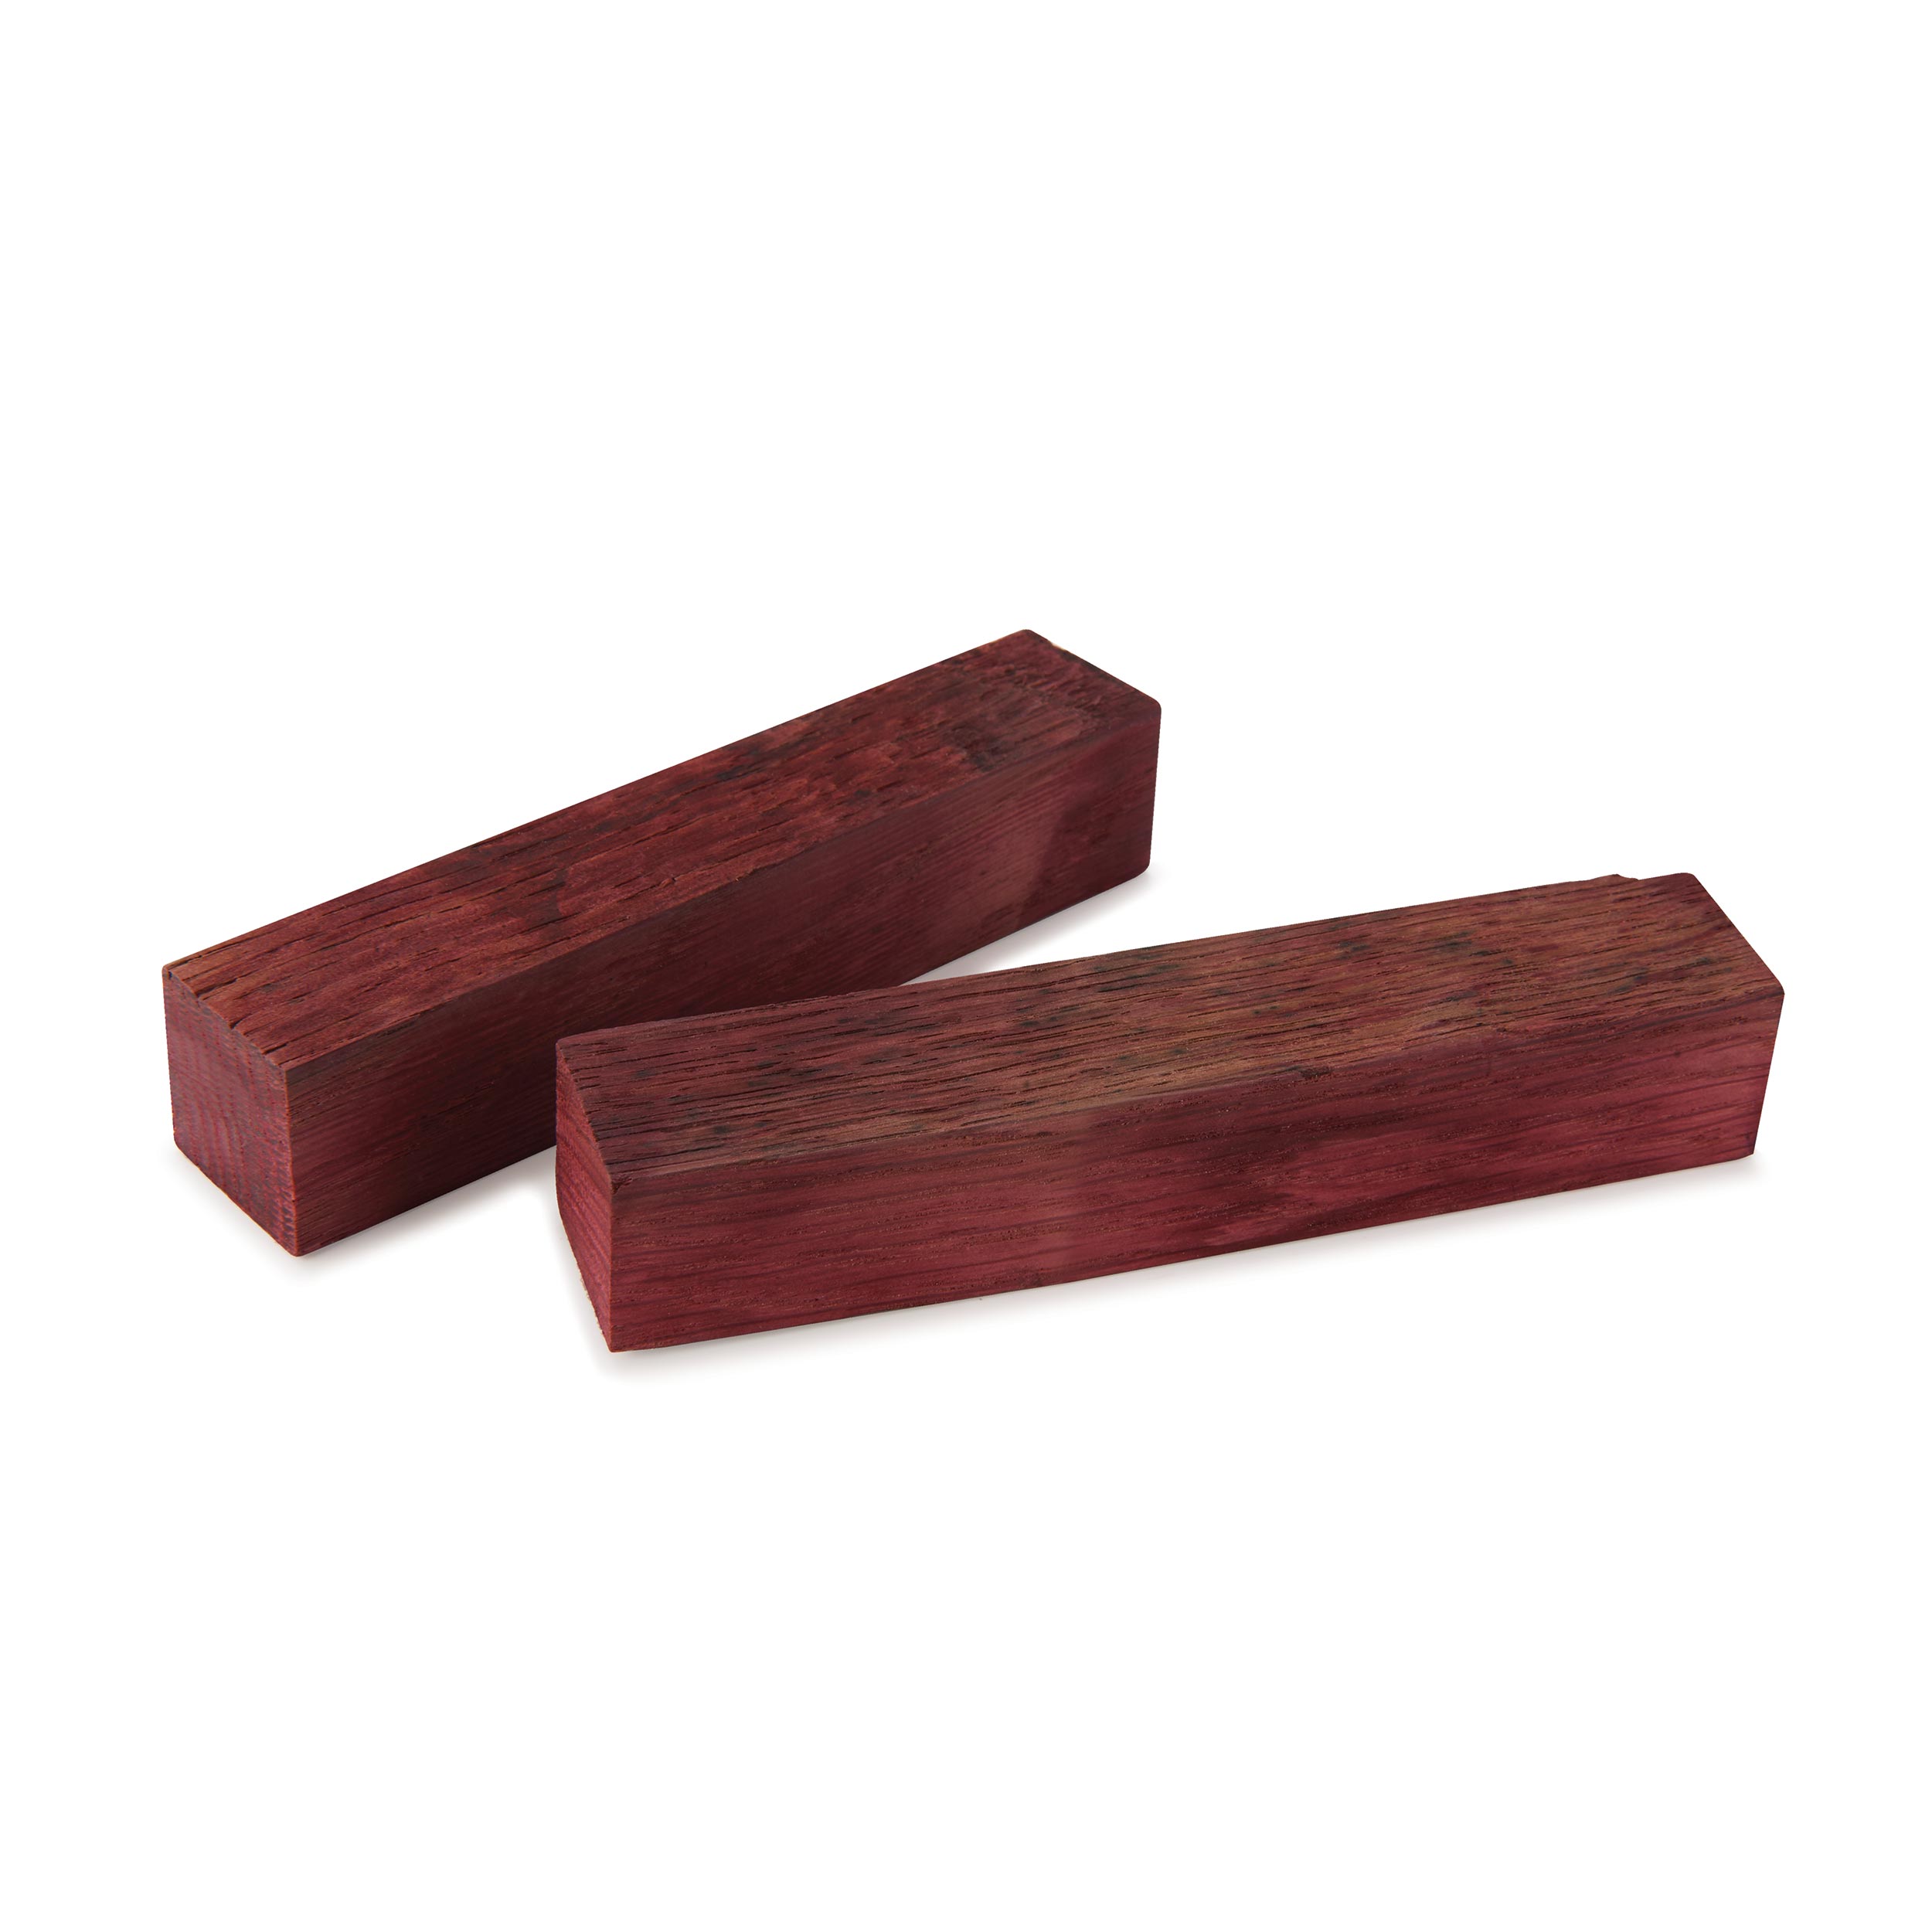 Whiskey Wood 3/4" X 3/4" X 5" Red Wine Infused Barrel Staves Pen Blanks 2-piece